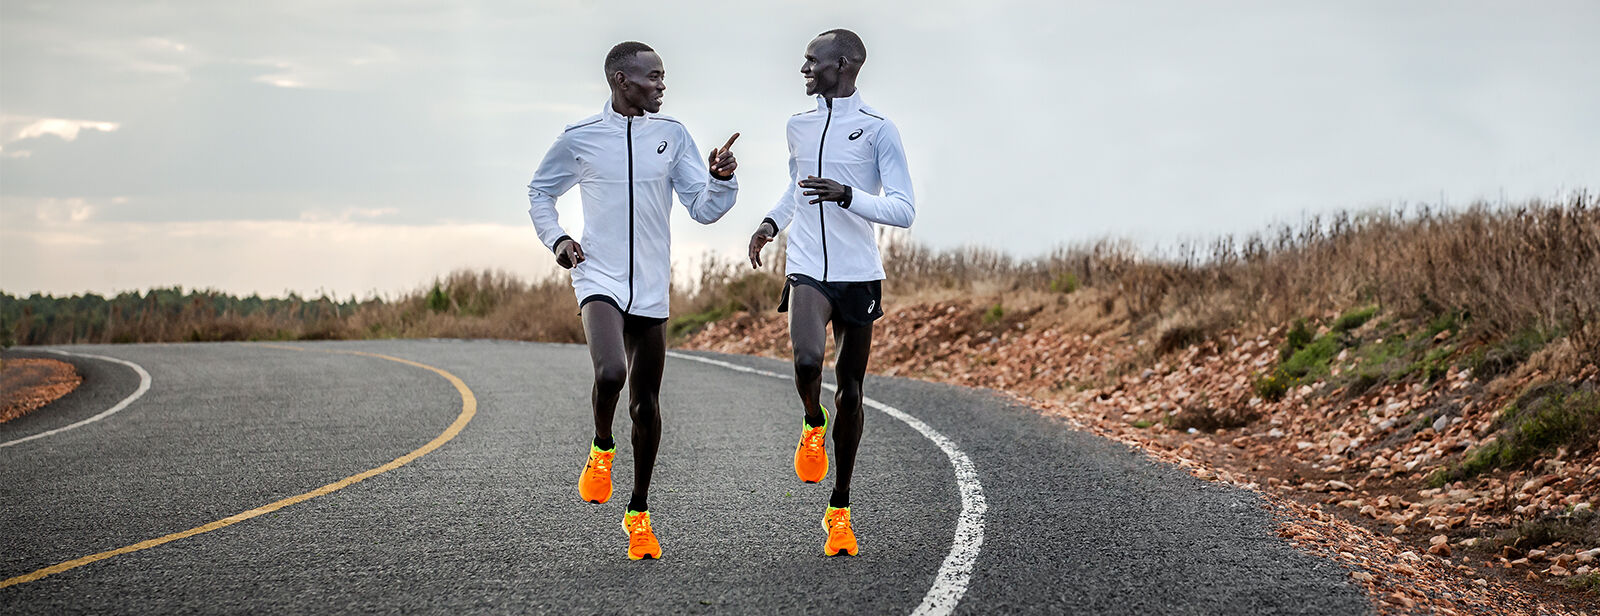 How to run a faster mile | ASICS